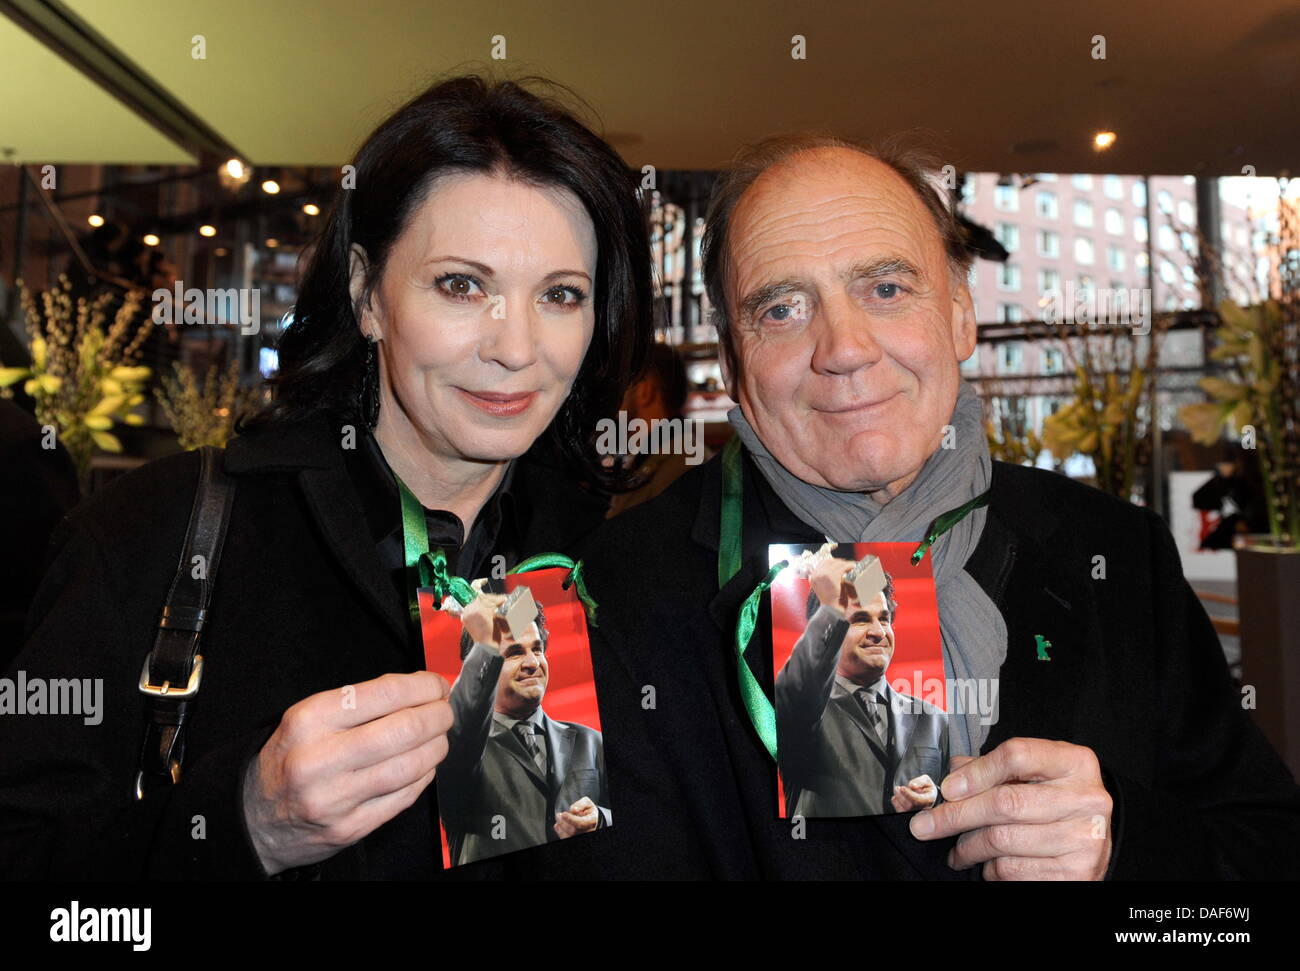 Actors Iris Berben and Bruno Ganz arrive for the premiere of the movie 'Offside' showing a picture of director Iranian director Jafar Panahi during the 61st Berlin International Film Festival in Berlin, Germany on 11 February 2011. The film is running in the Competition's Special Screening of the International Film Festival. The 61st Berlinale takes place from 10 to 20 February 201 Stock Photo